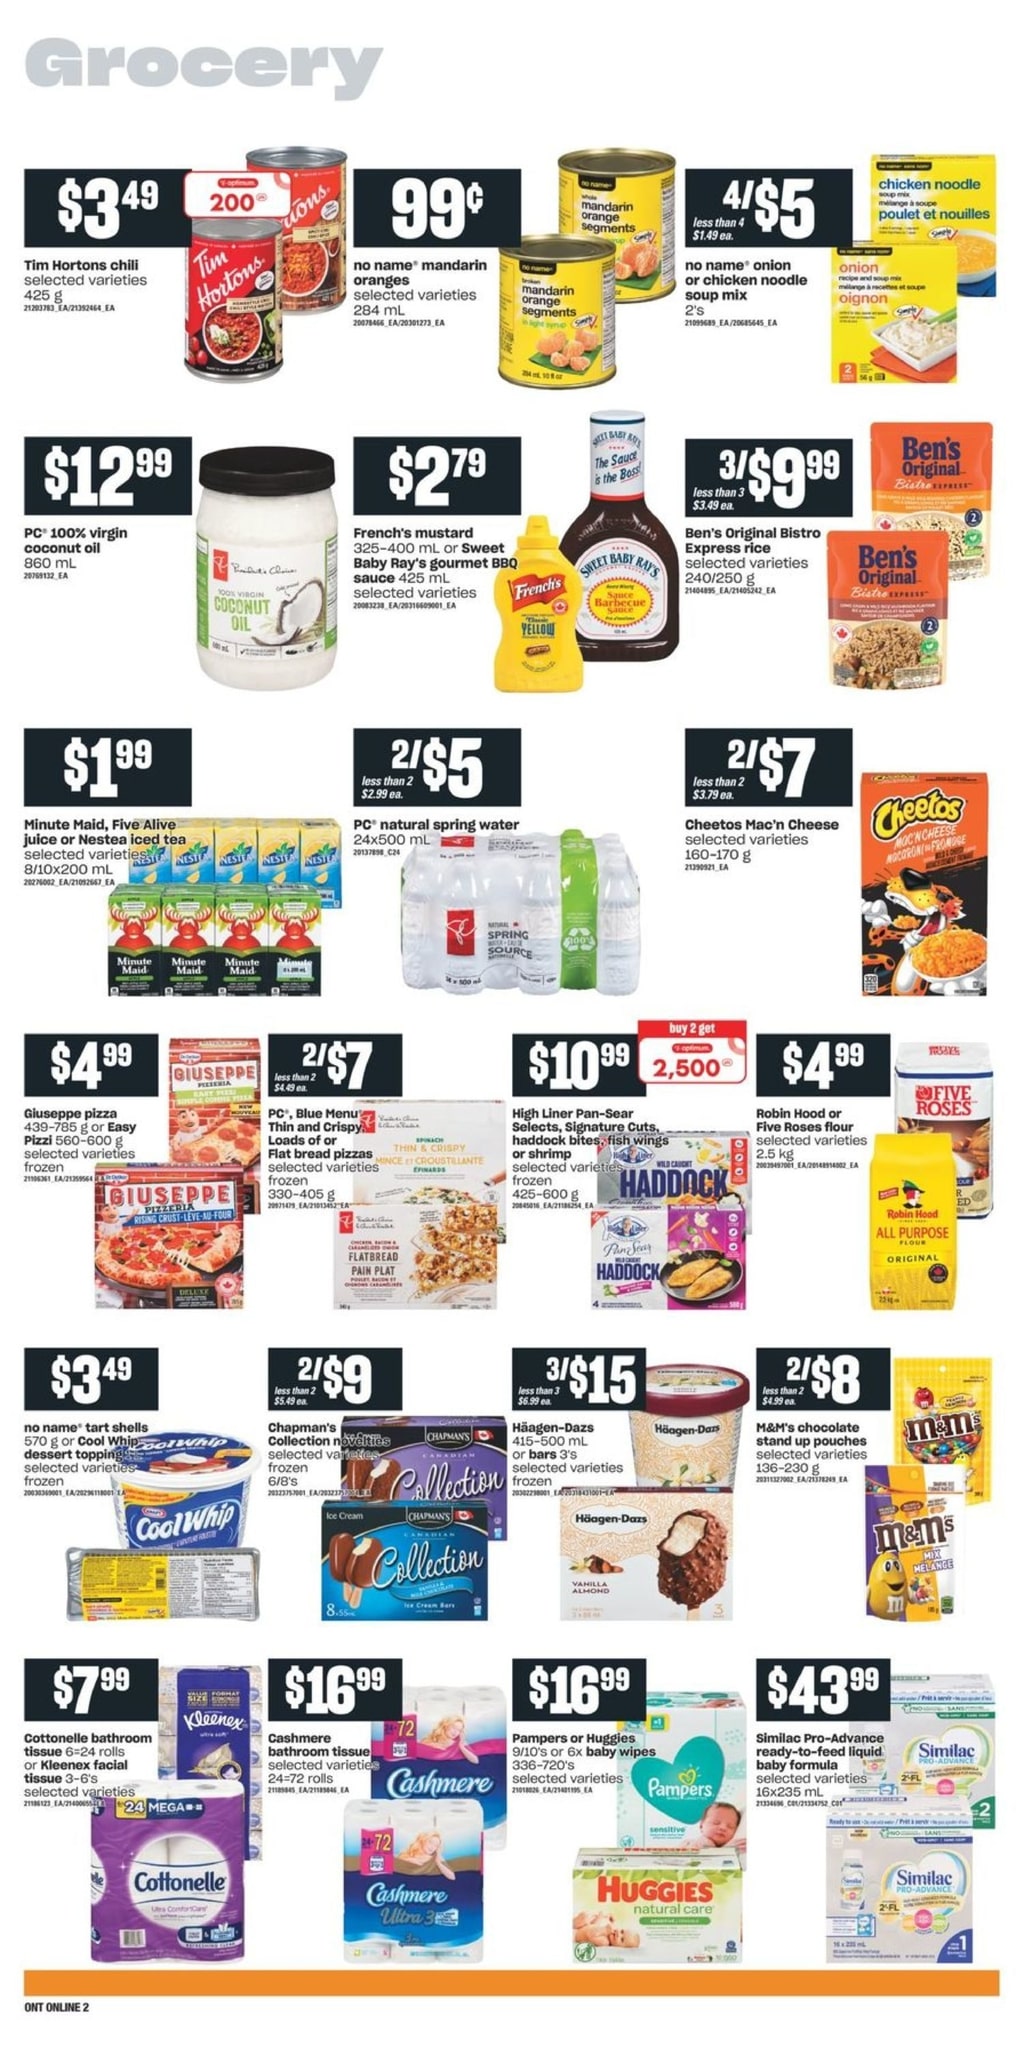 Independent Ontario - Weekly Flyer Specials - Page 6